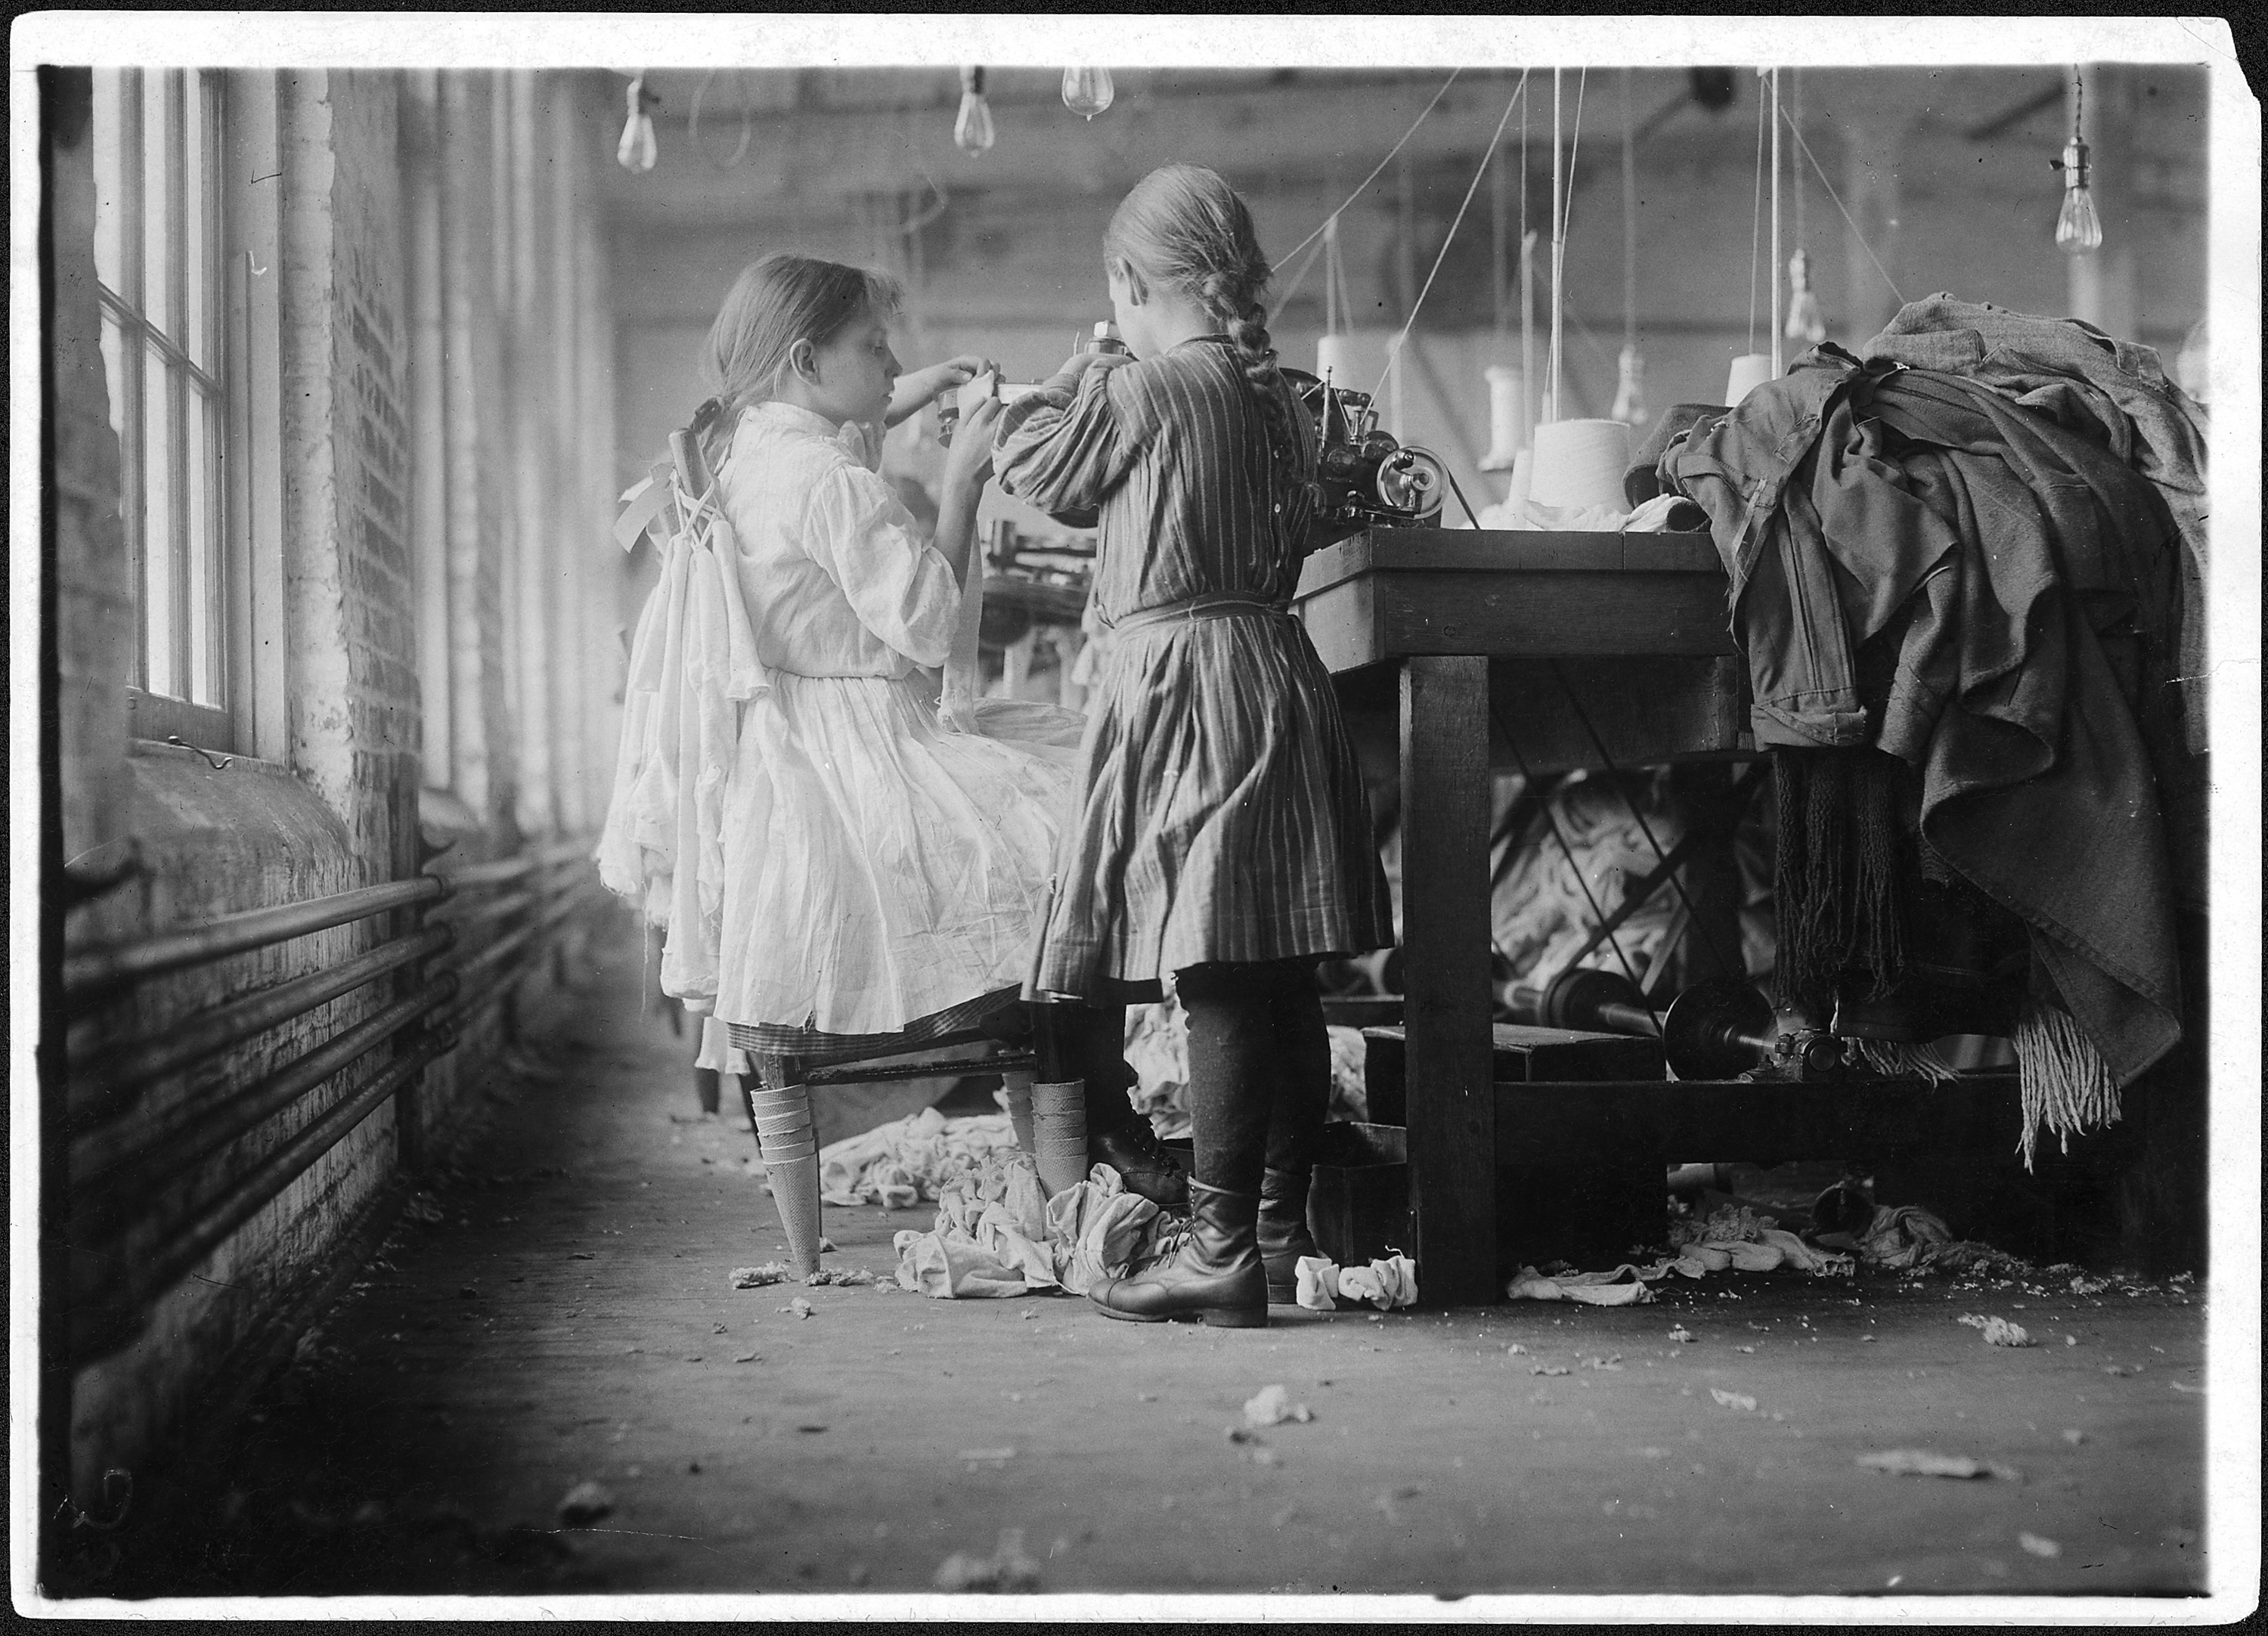 Two of the tiny workers, a raveler and a looper in London Hosiery Mills. London, Tenn. - NARA - 523370